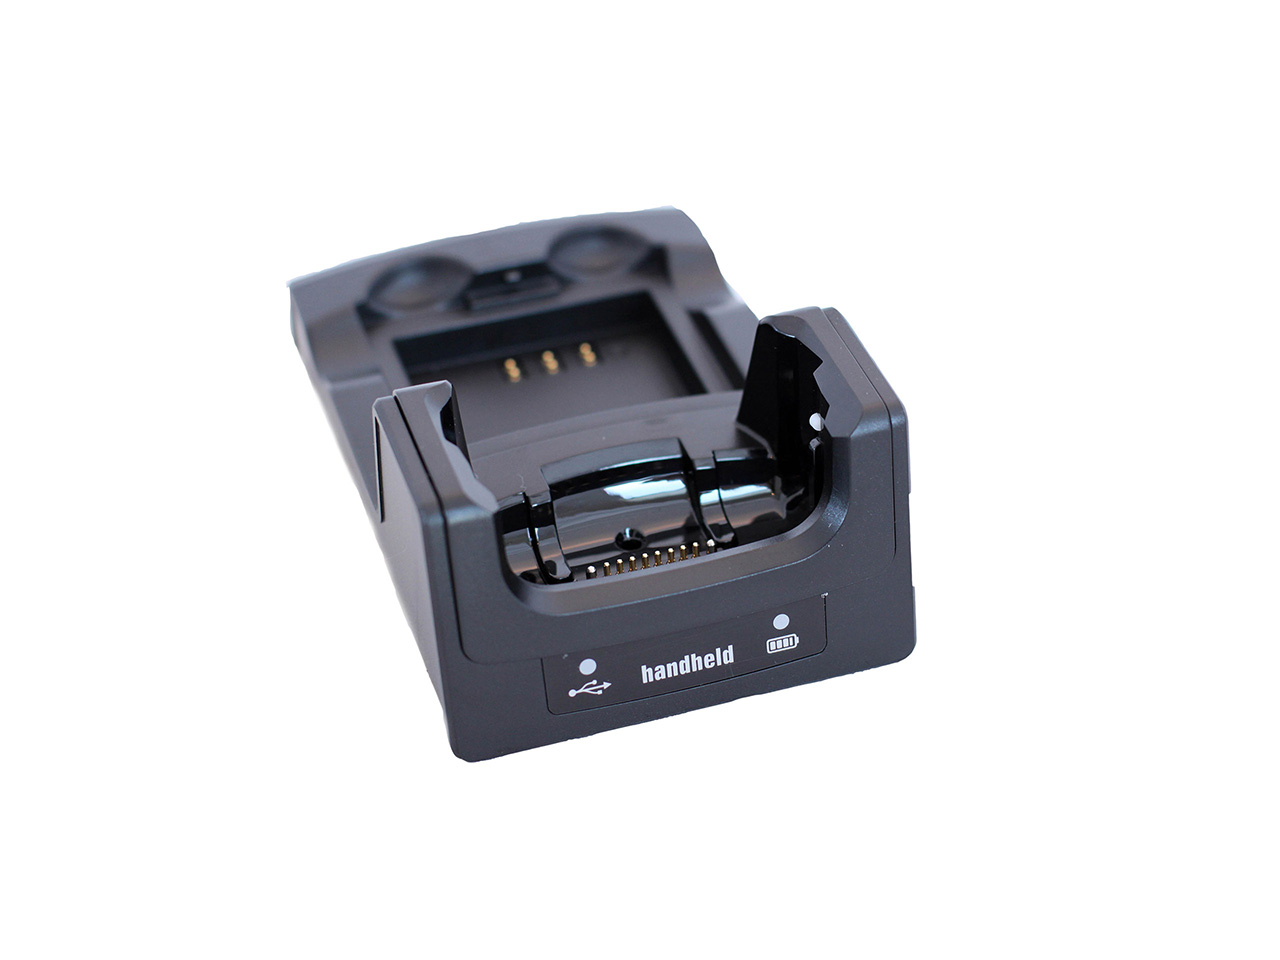 NX3-1007_1 slot standard cradle_charger and USB cable included.jpg